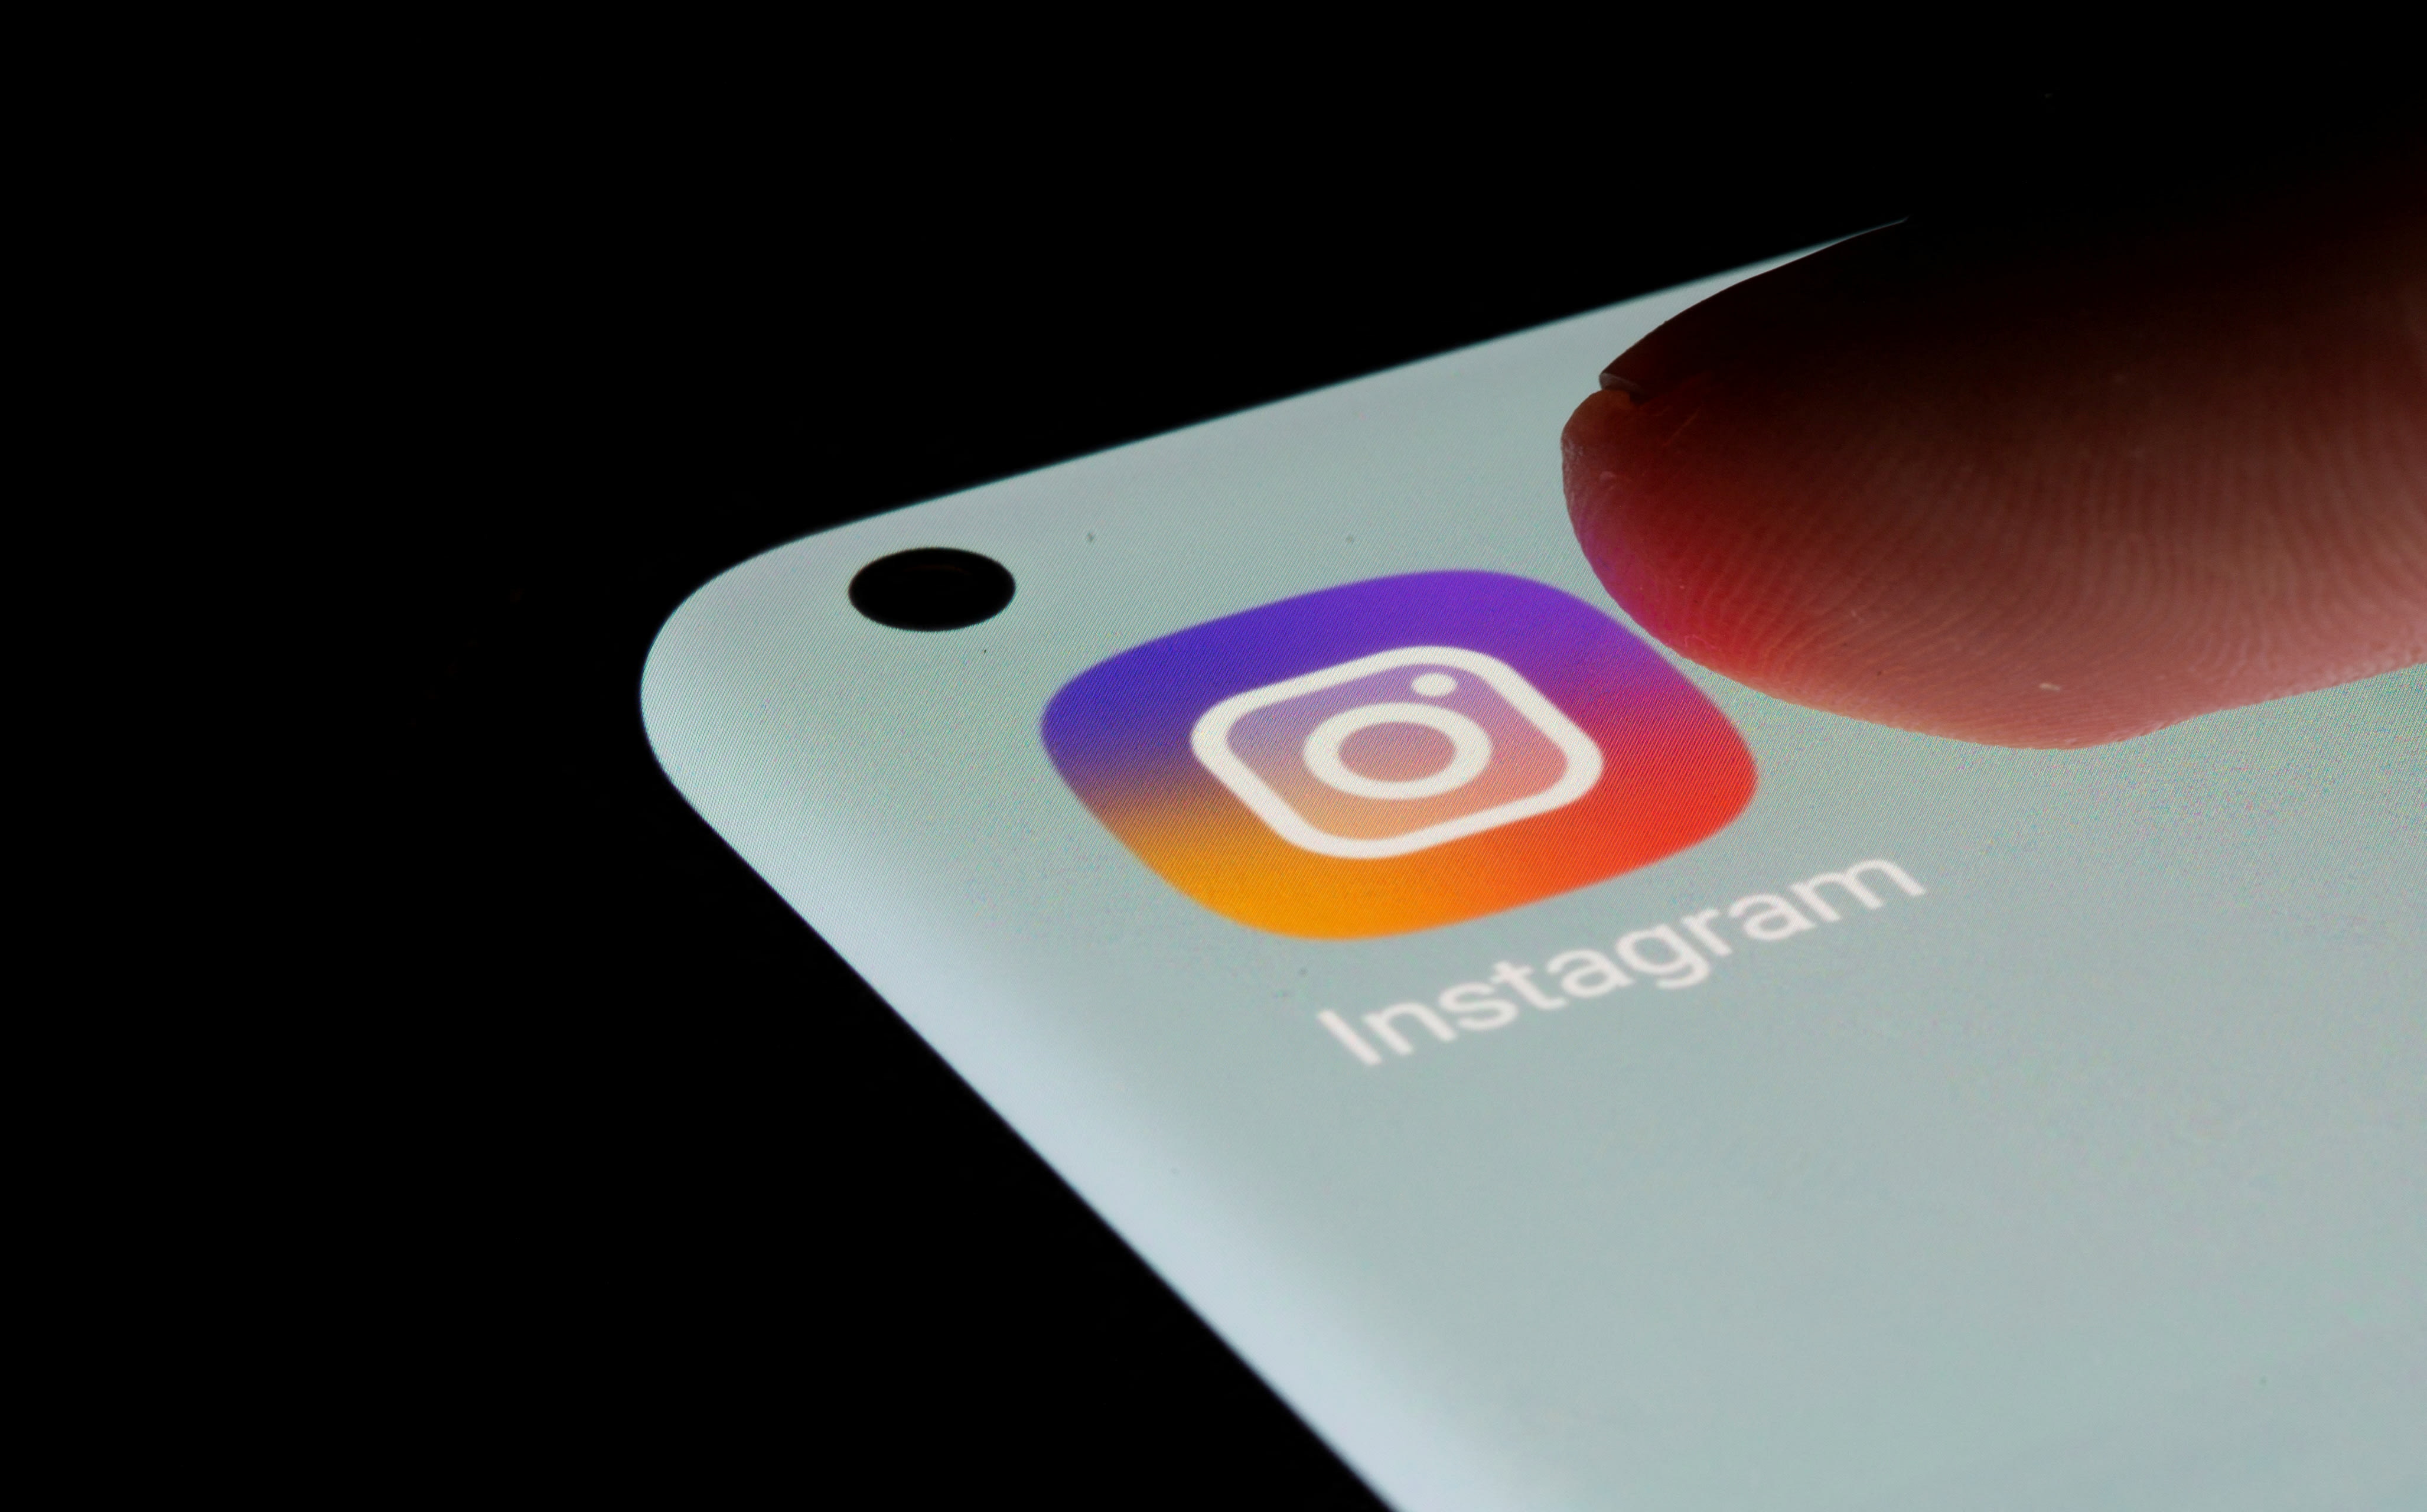 Why can’t Instagram verify users’ ages and keep kids off the app?